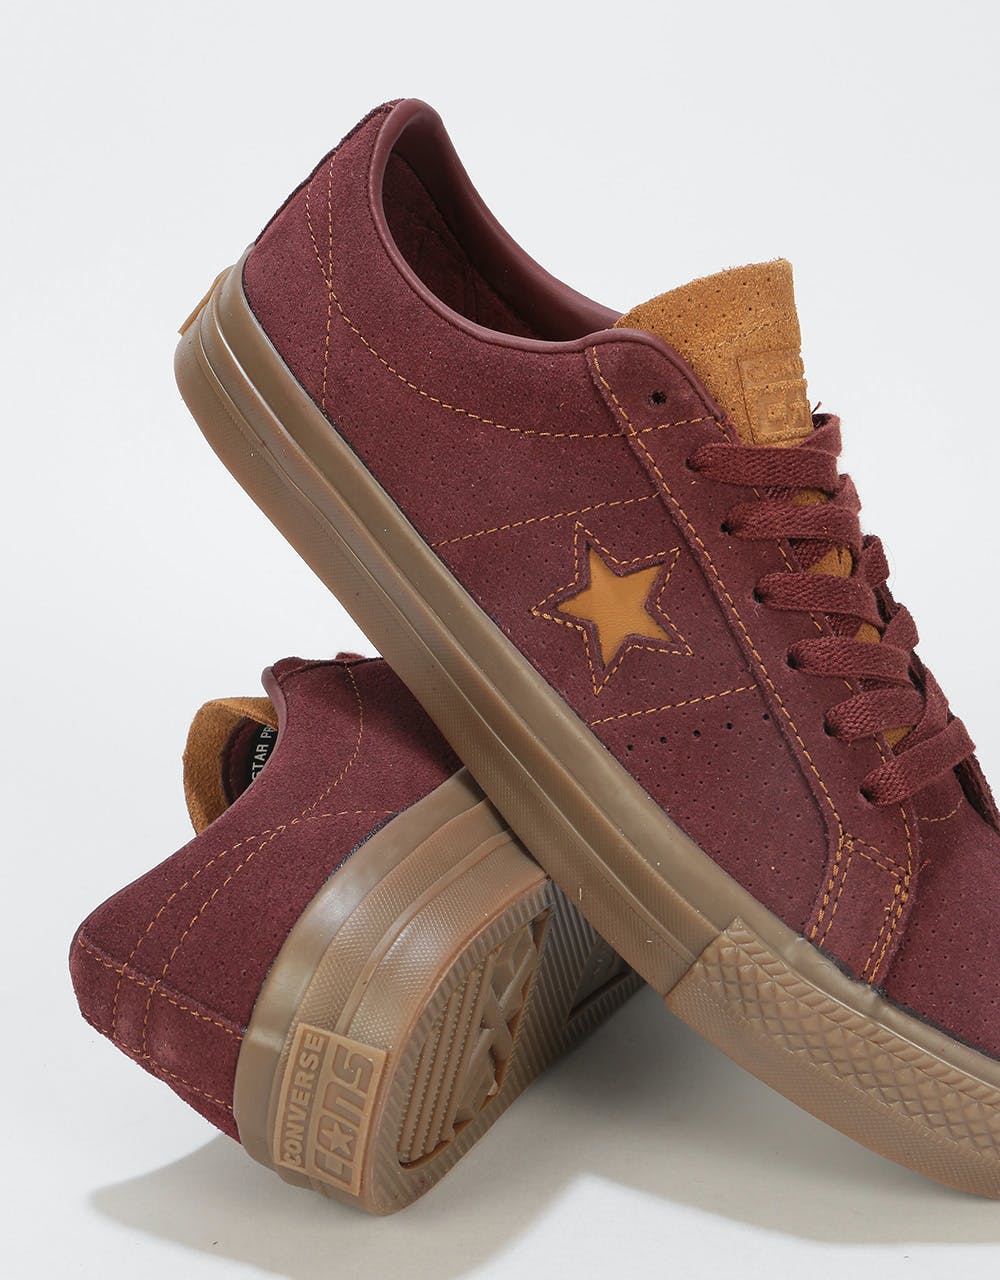 Converse One Star Pro Ox Skate Shoes - Barkroot Brown/Ale Brown/Brown